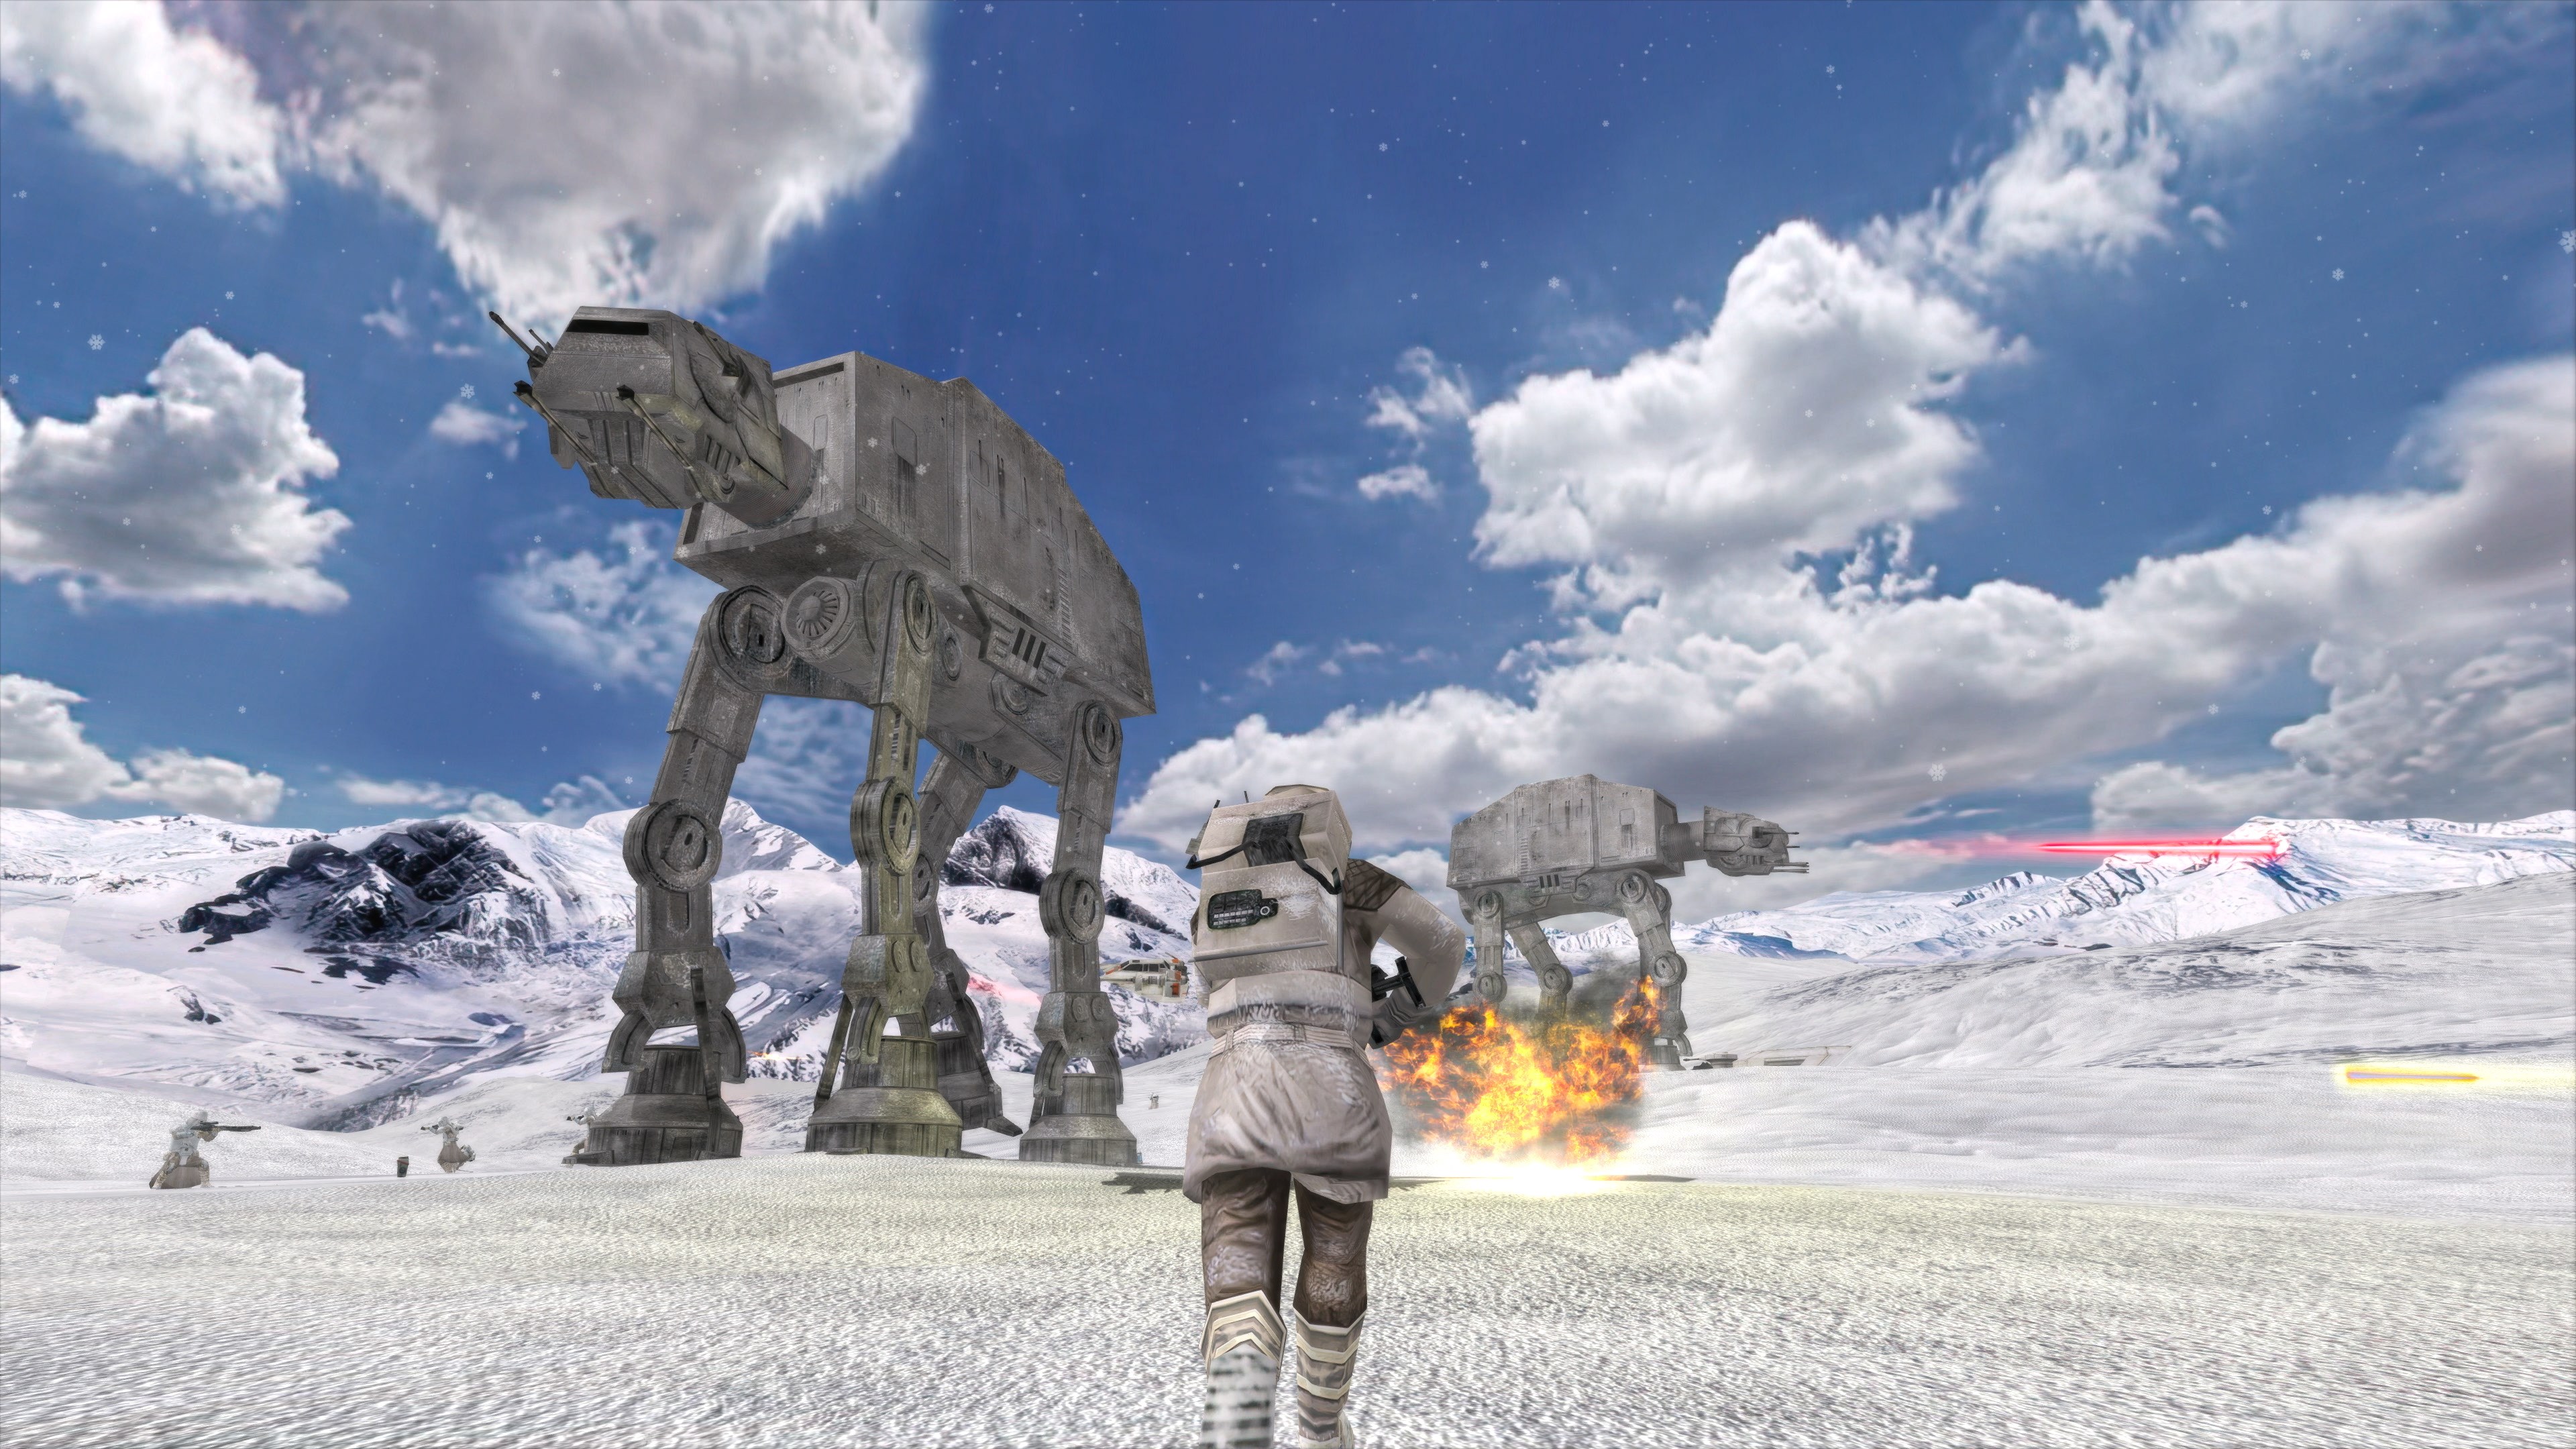 STAR WARS: Battlefront Classic Collection PC Steam